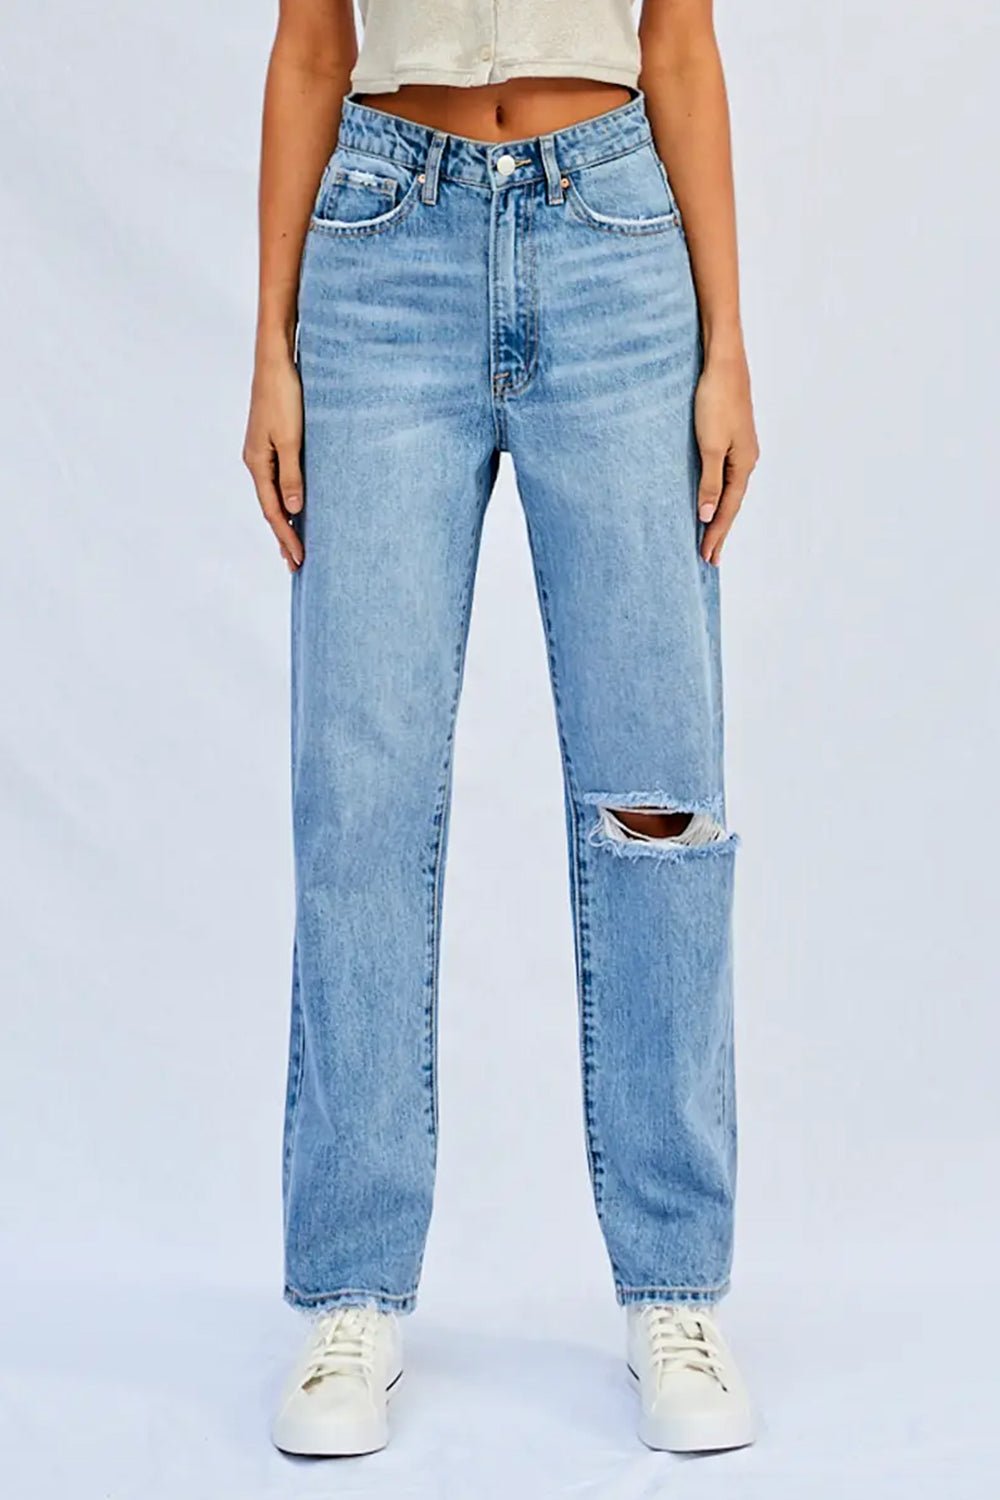 Insane Gene High Rise Ripped Straight Jeans